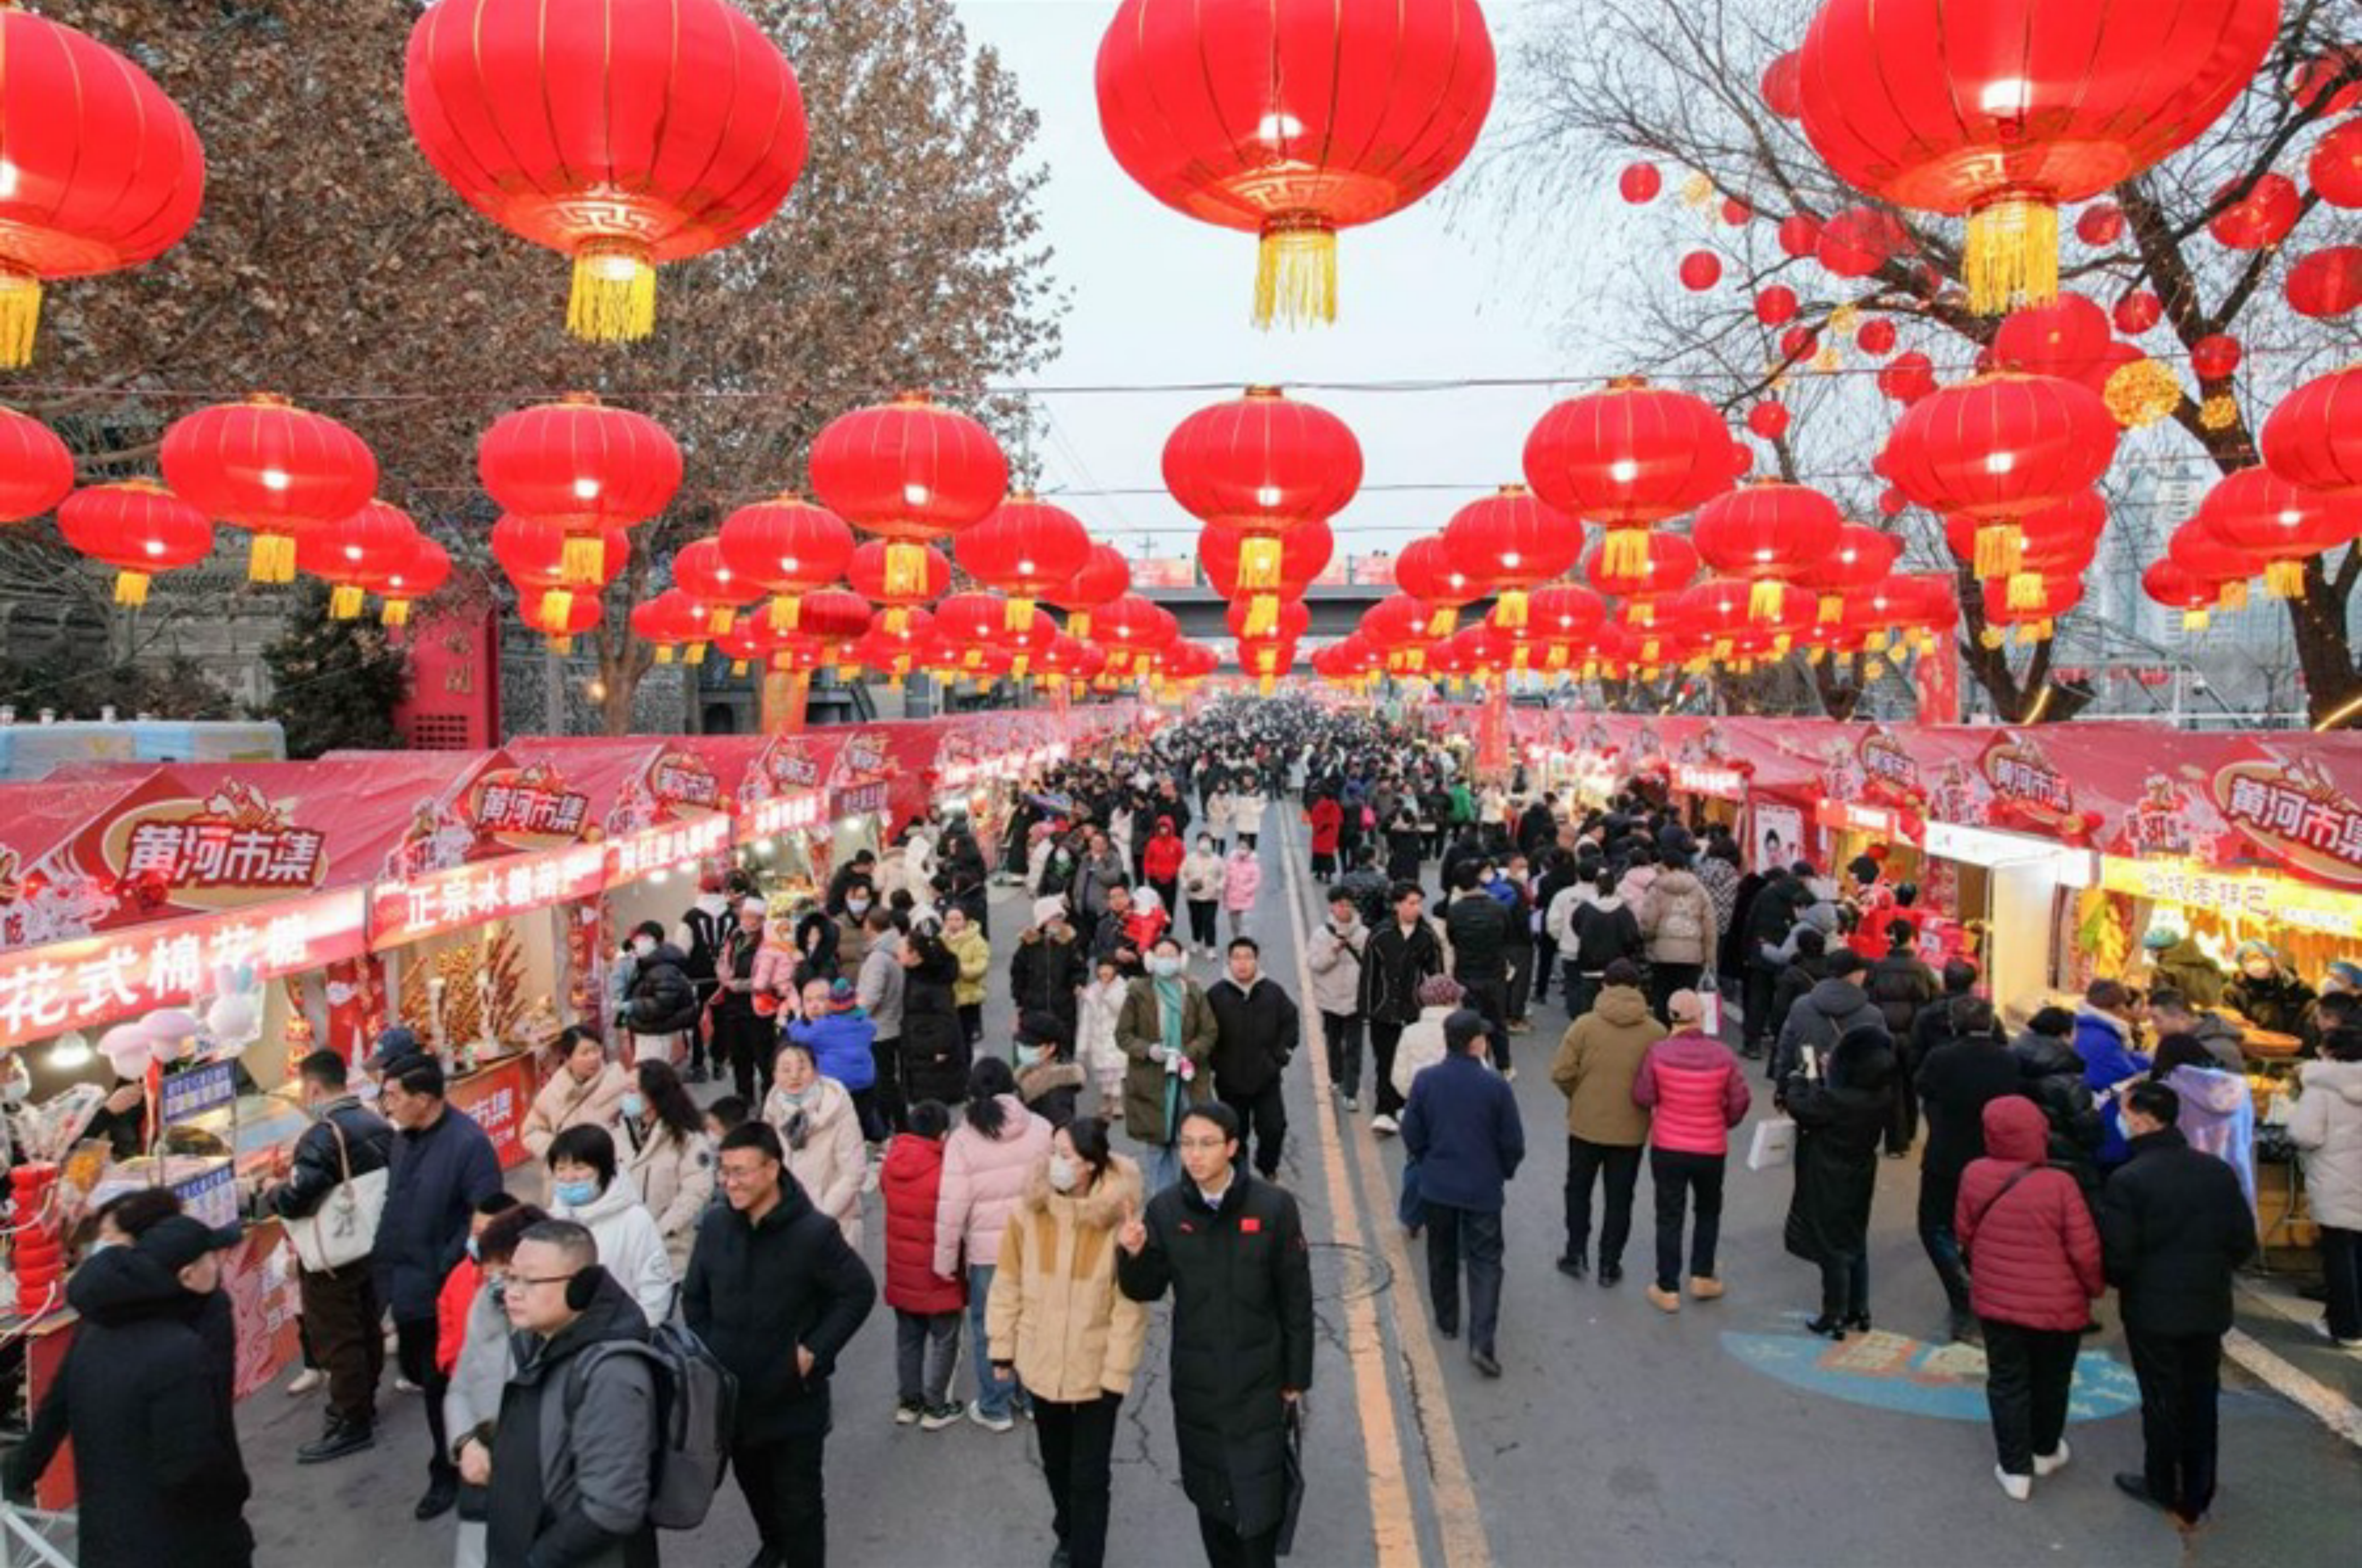 People prepare for upcoming Chinese New Year across China